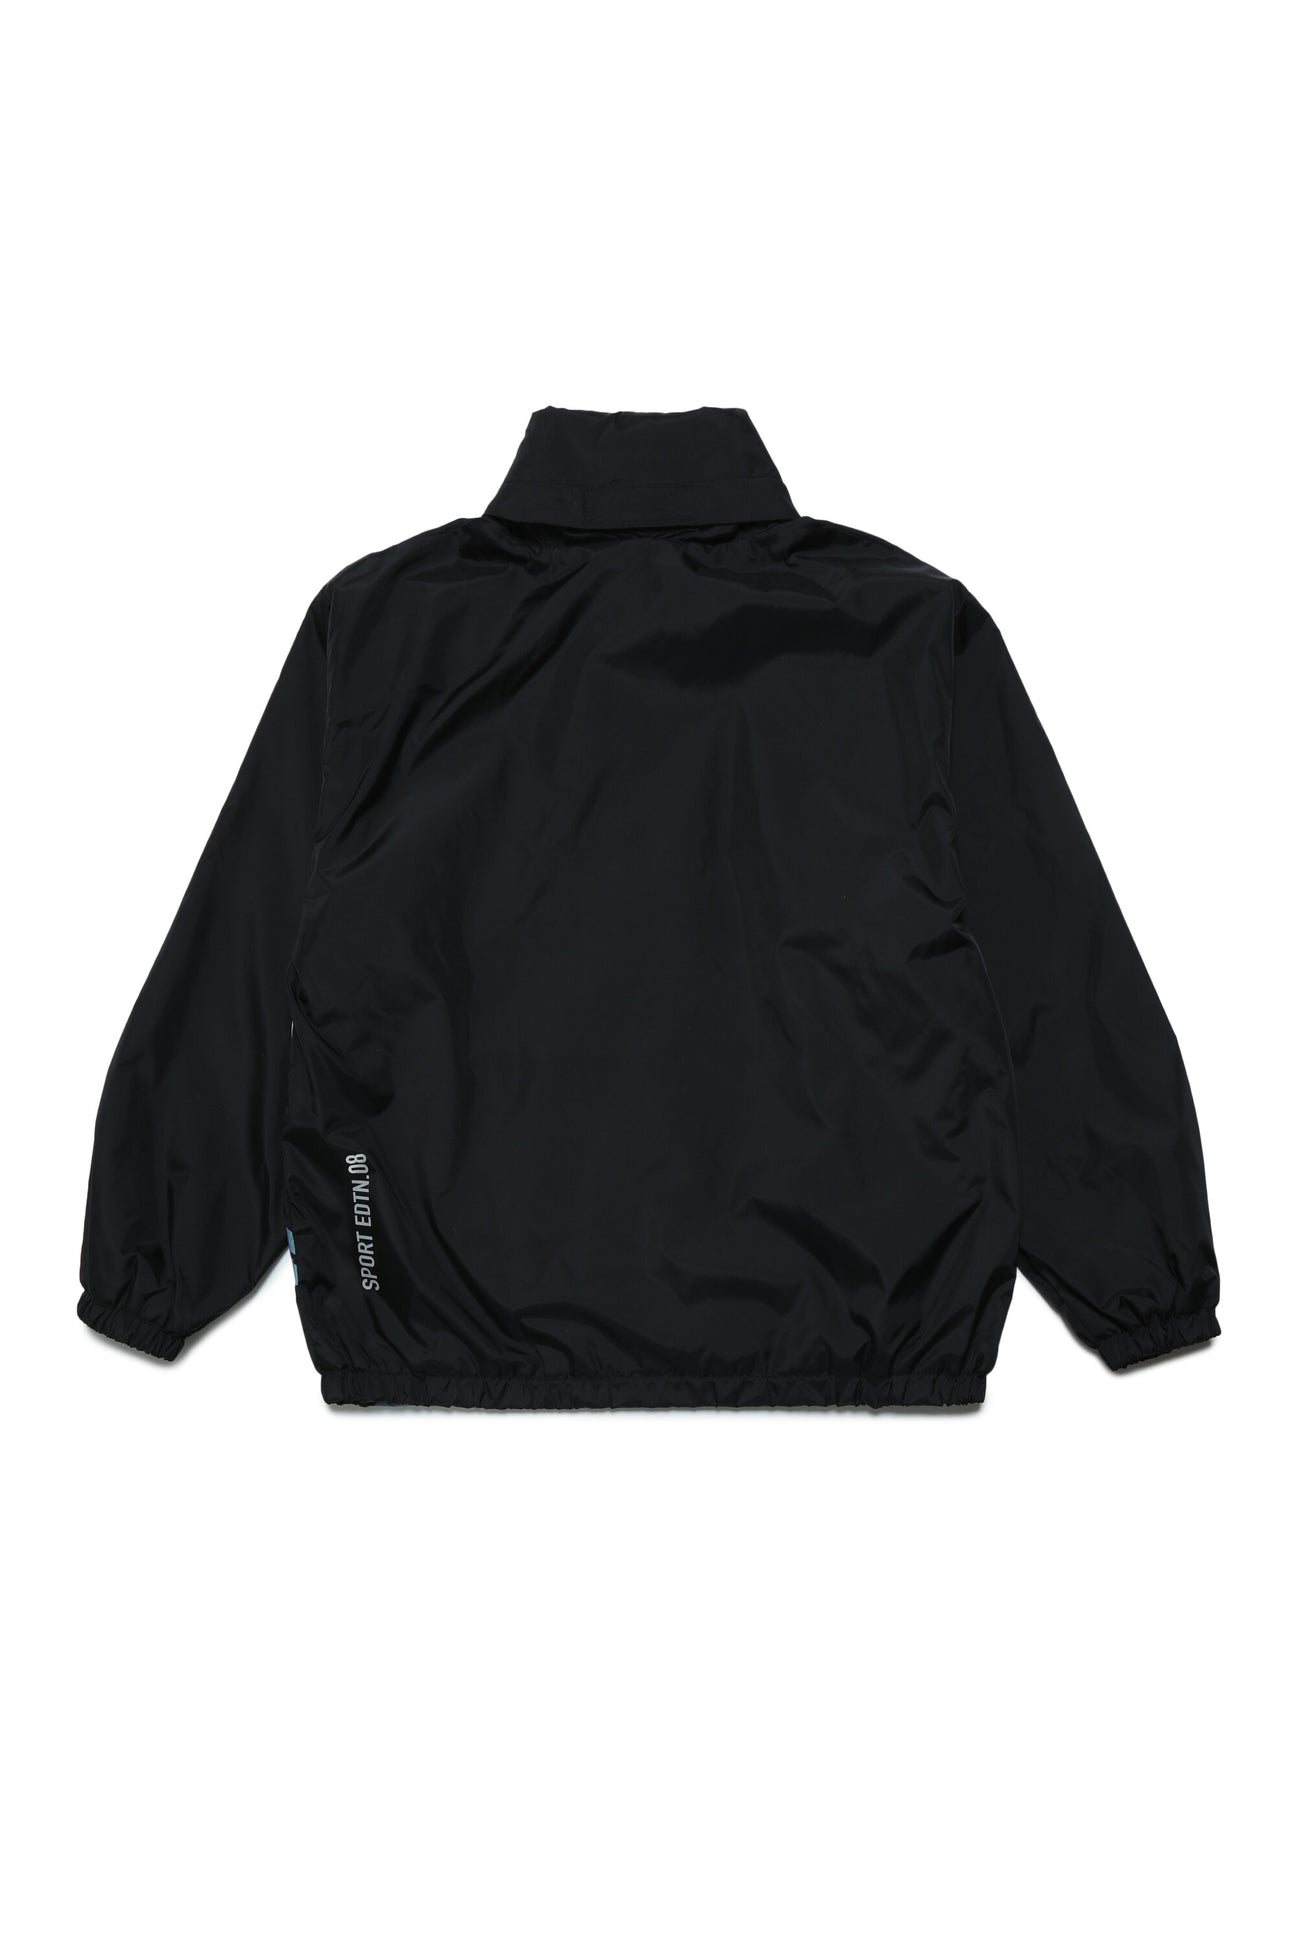 Lightweight jacket with 3D Cube logo Lightweight jacket with 3D Cube logo